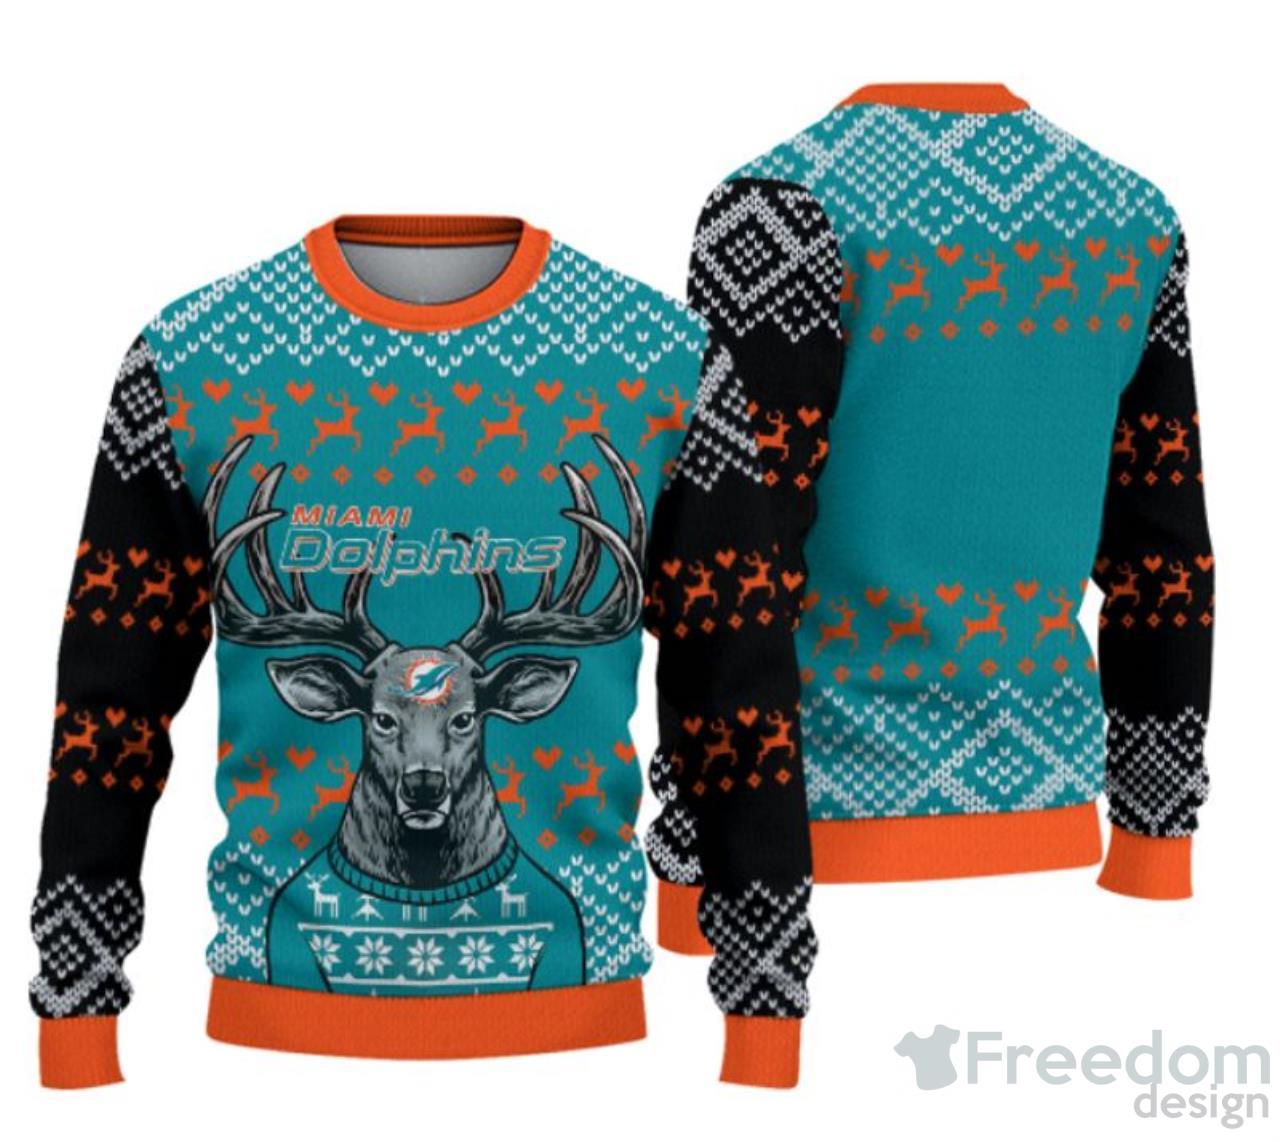 Miami Dolphins Shop - Miami Dolphins Christmas Reindeer Ugly Sweater Trending 4